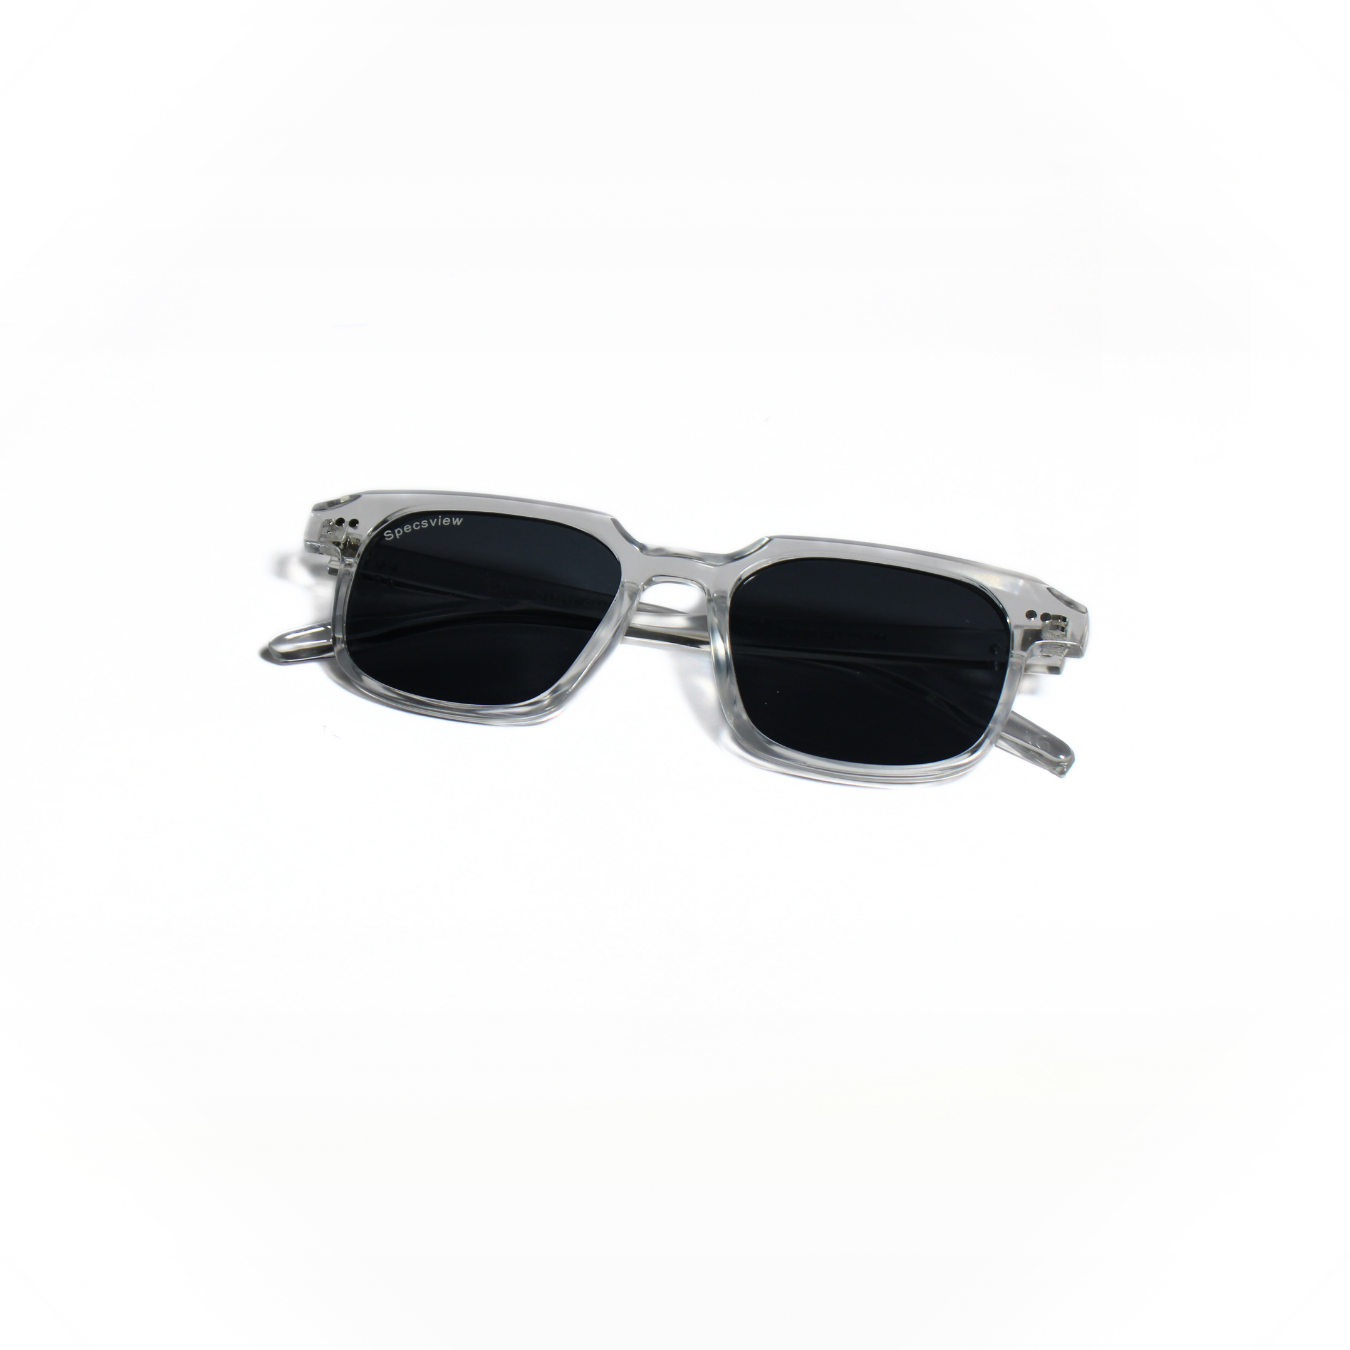 DIRK//001 I Sunglasses for Men and Women - Specsview